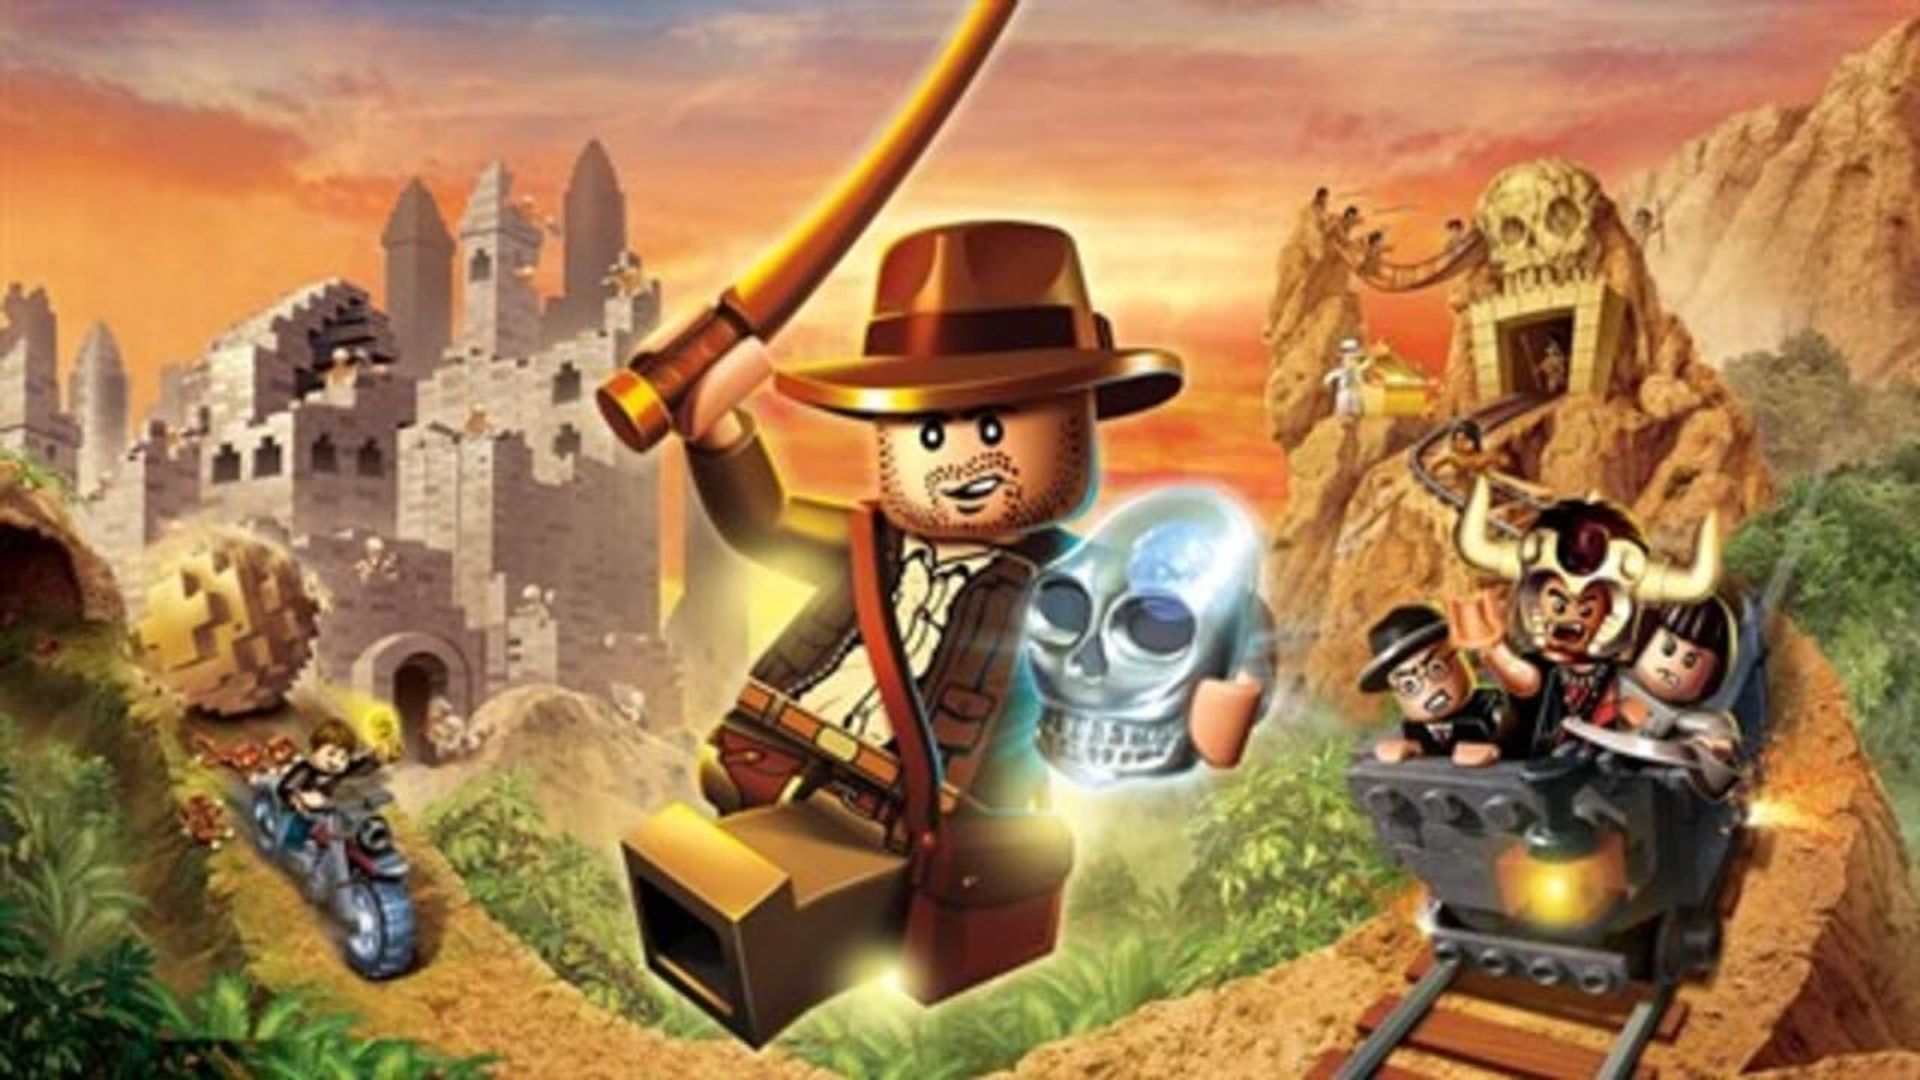 Lego Indiana Jones and the Raiders of the Lost Brick background